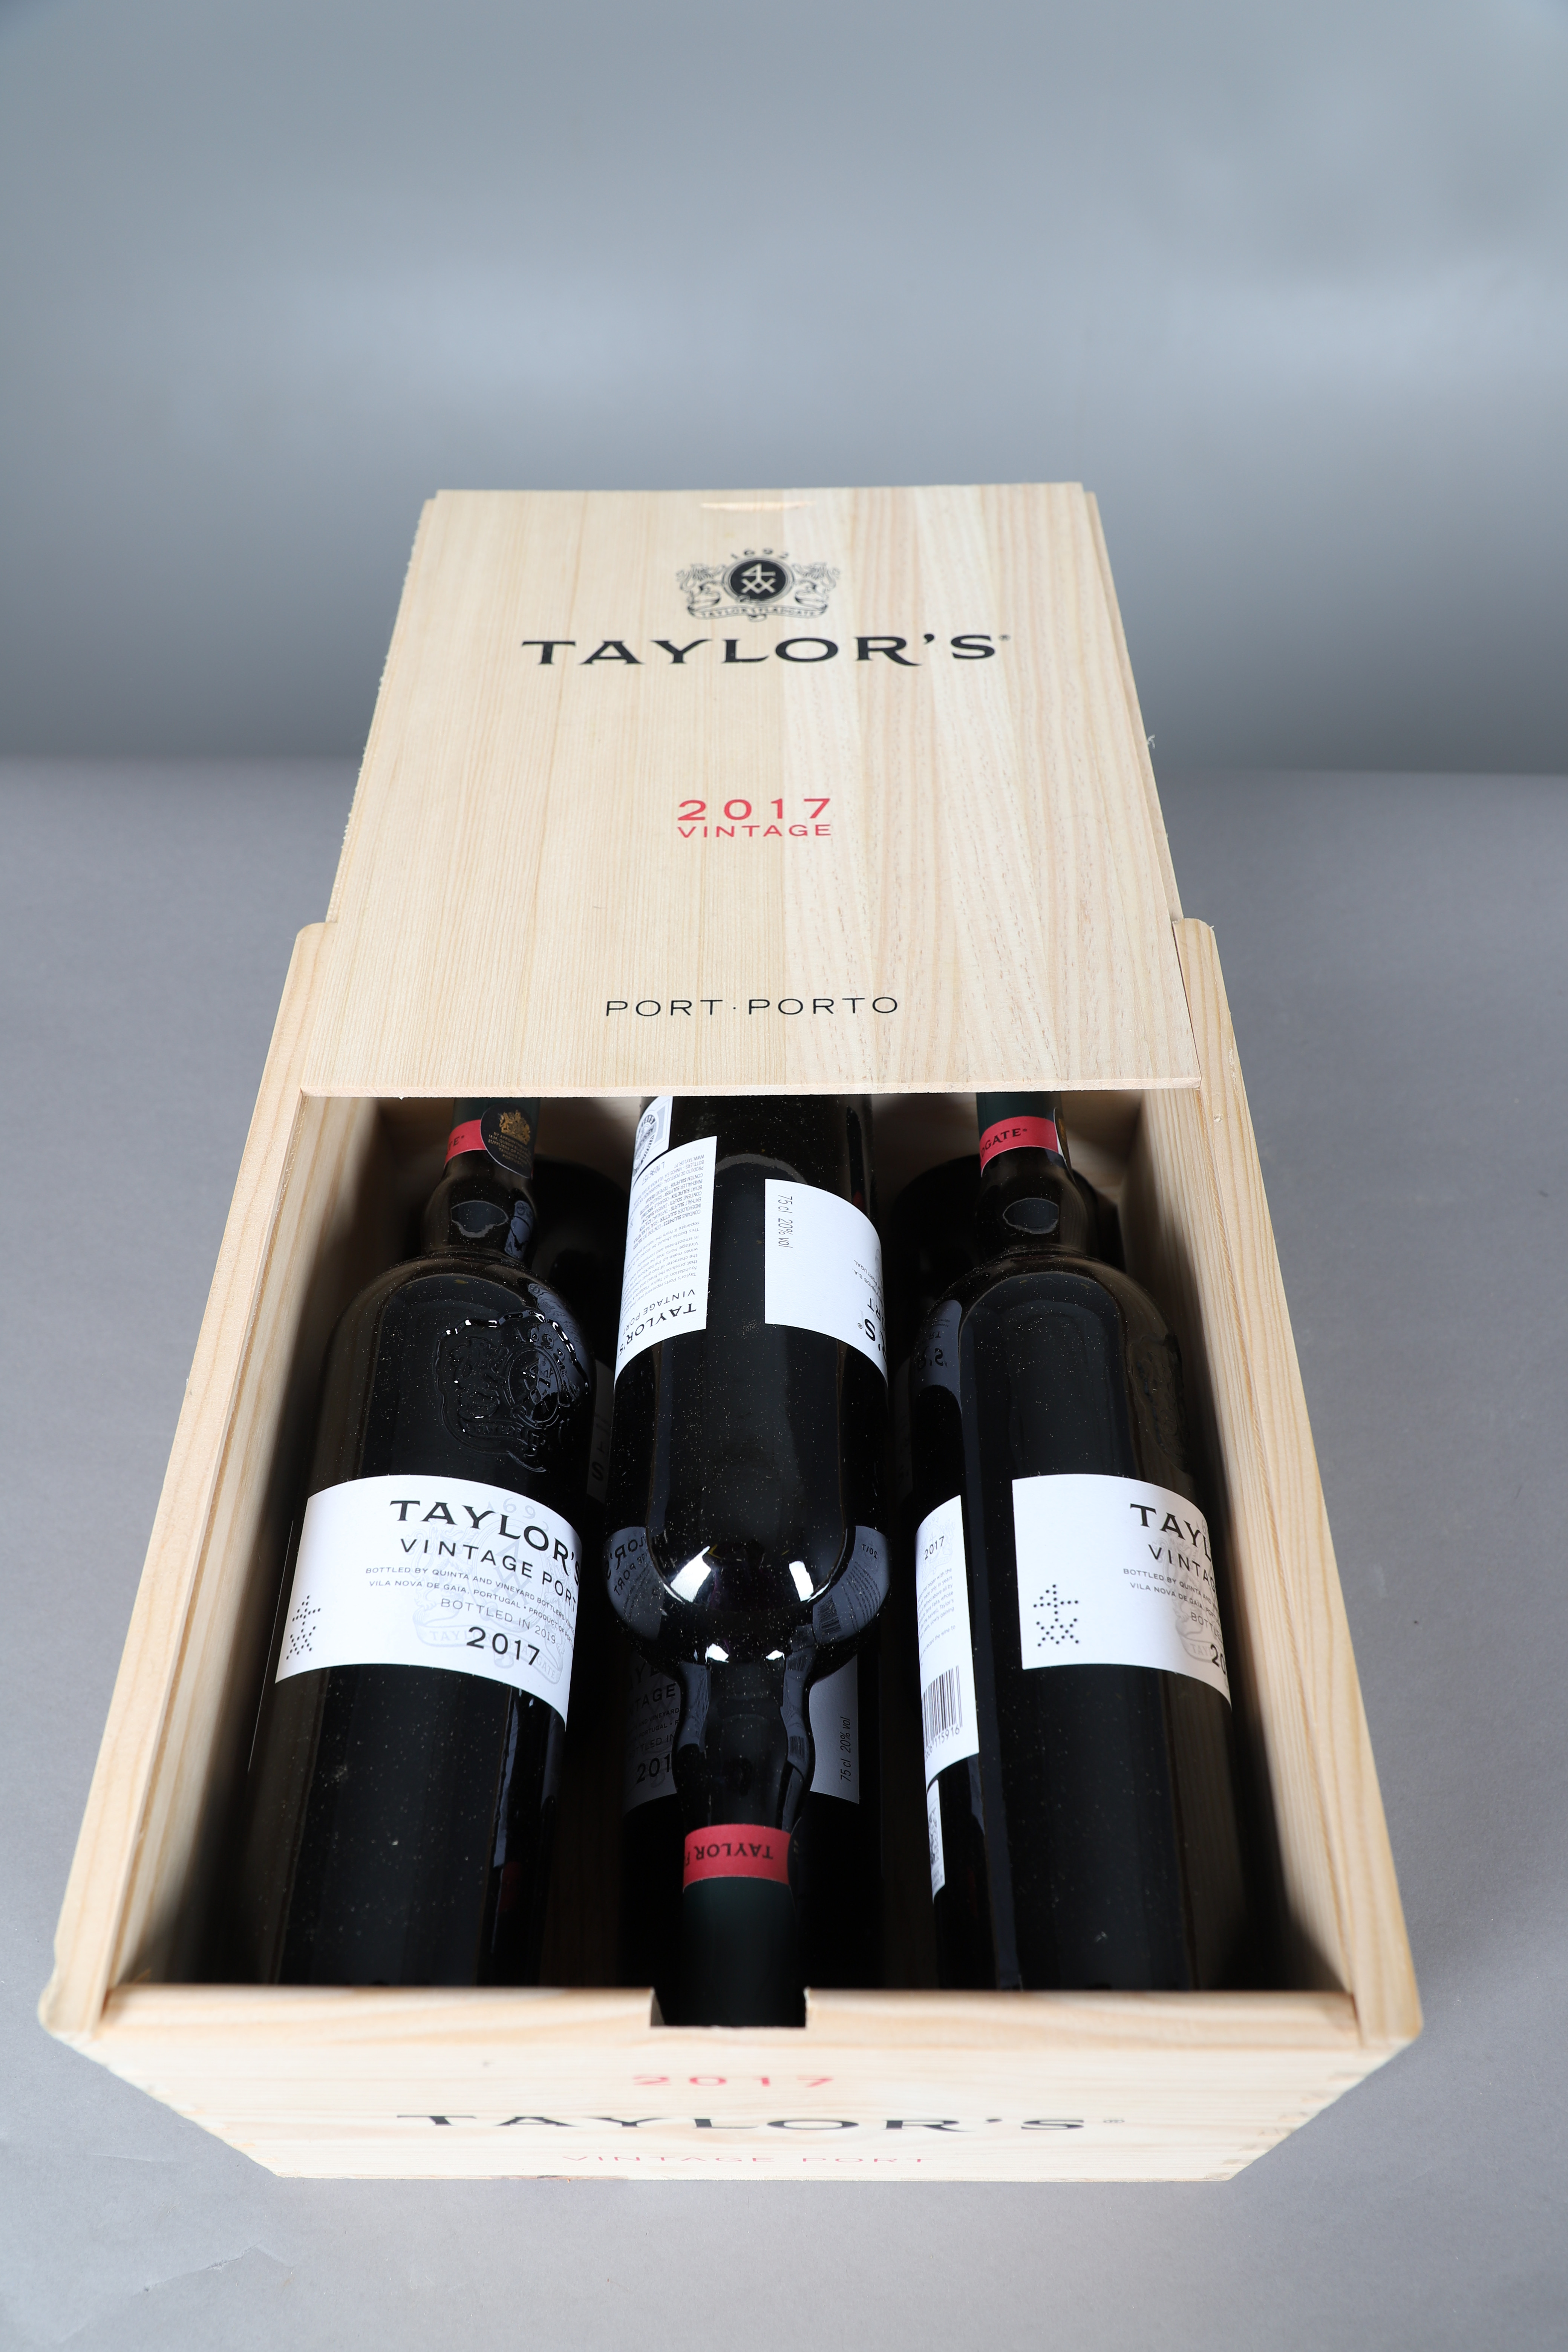 TAYLOR'S VINTAGE PORT 2017 - BOXED. - Image 5 of 6